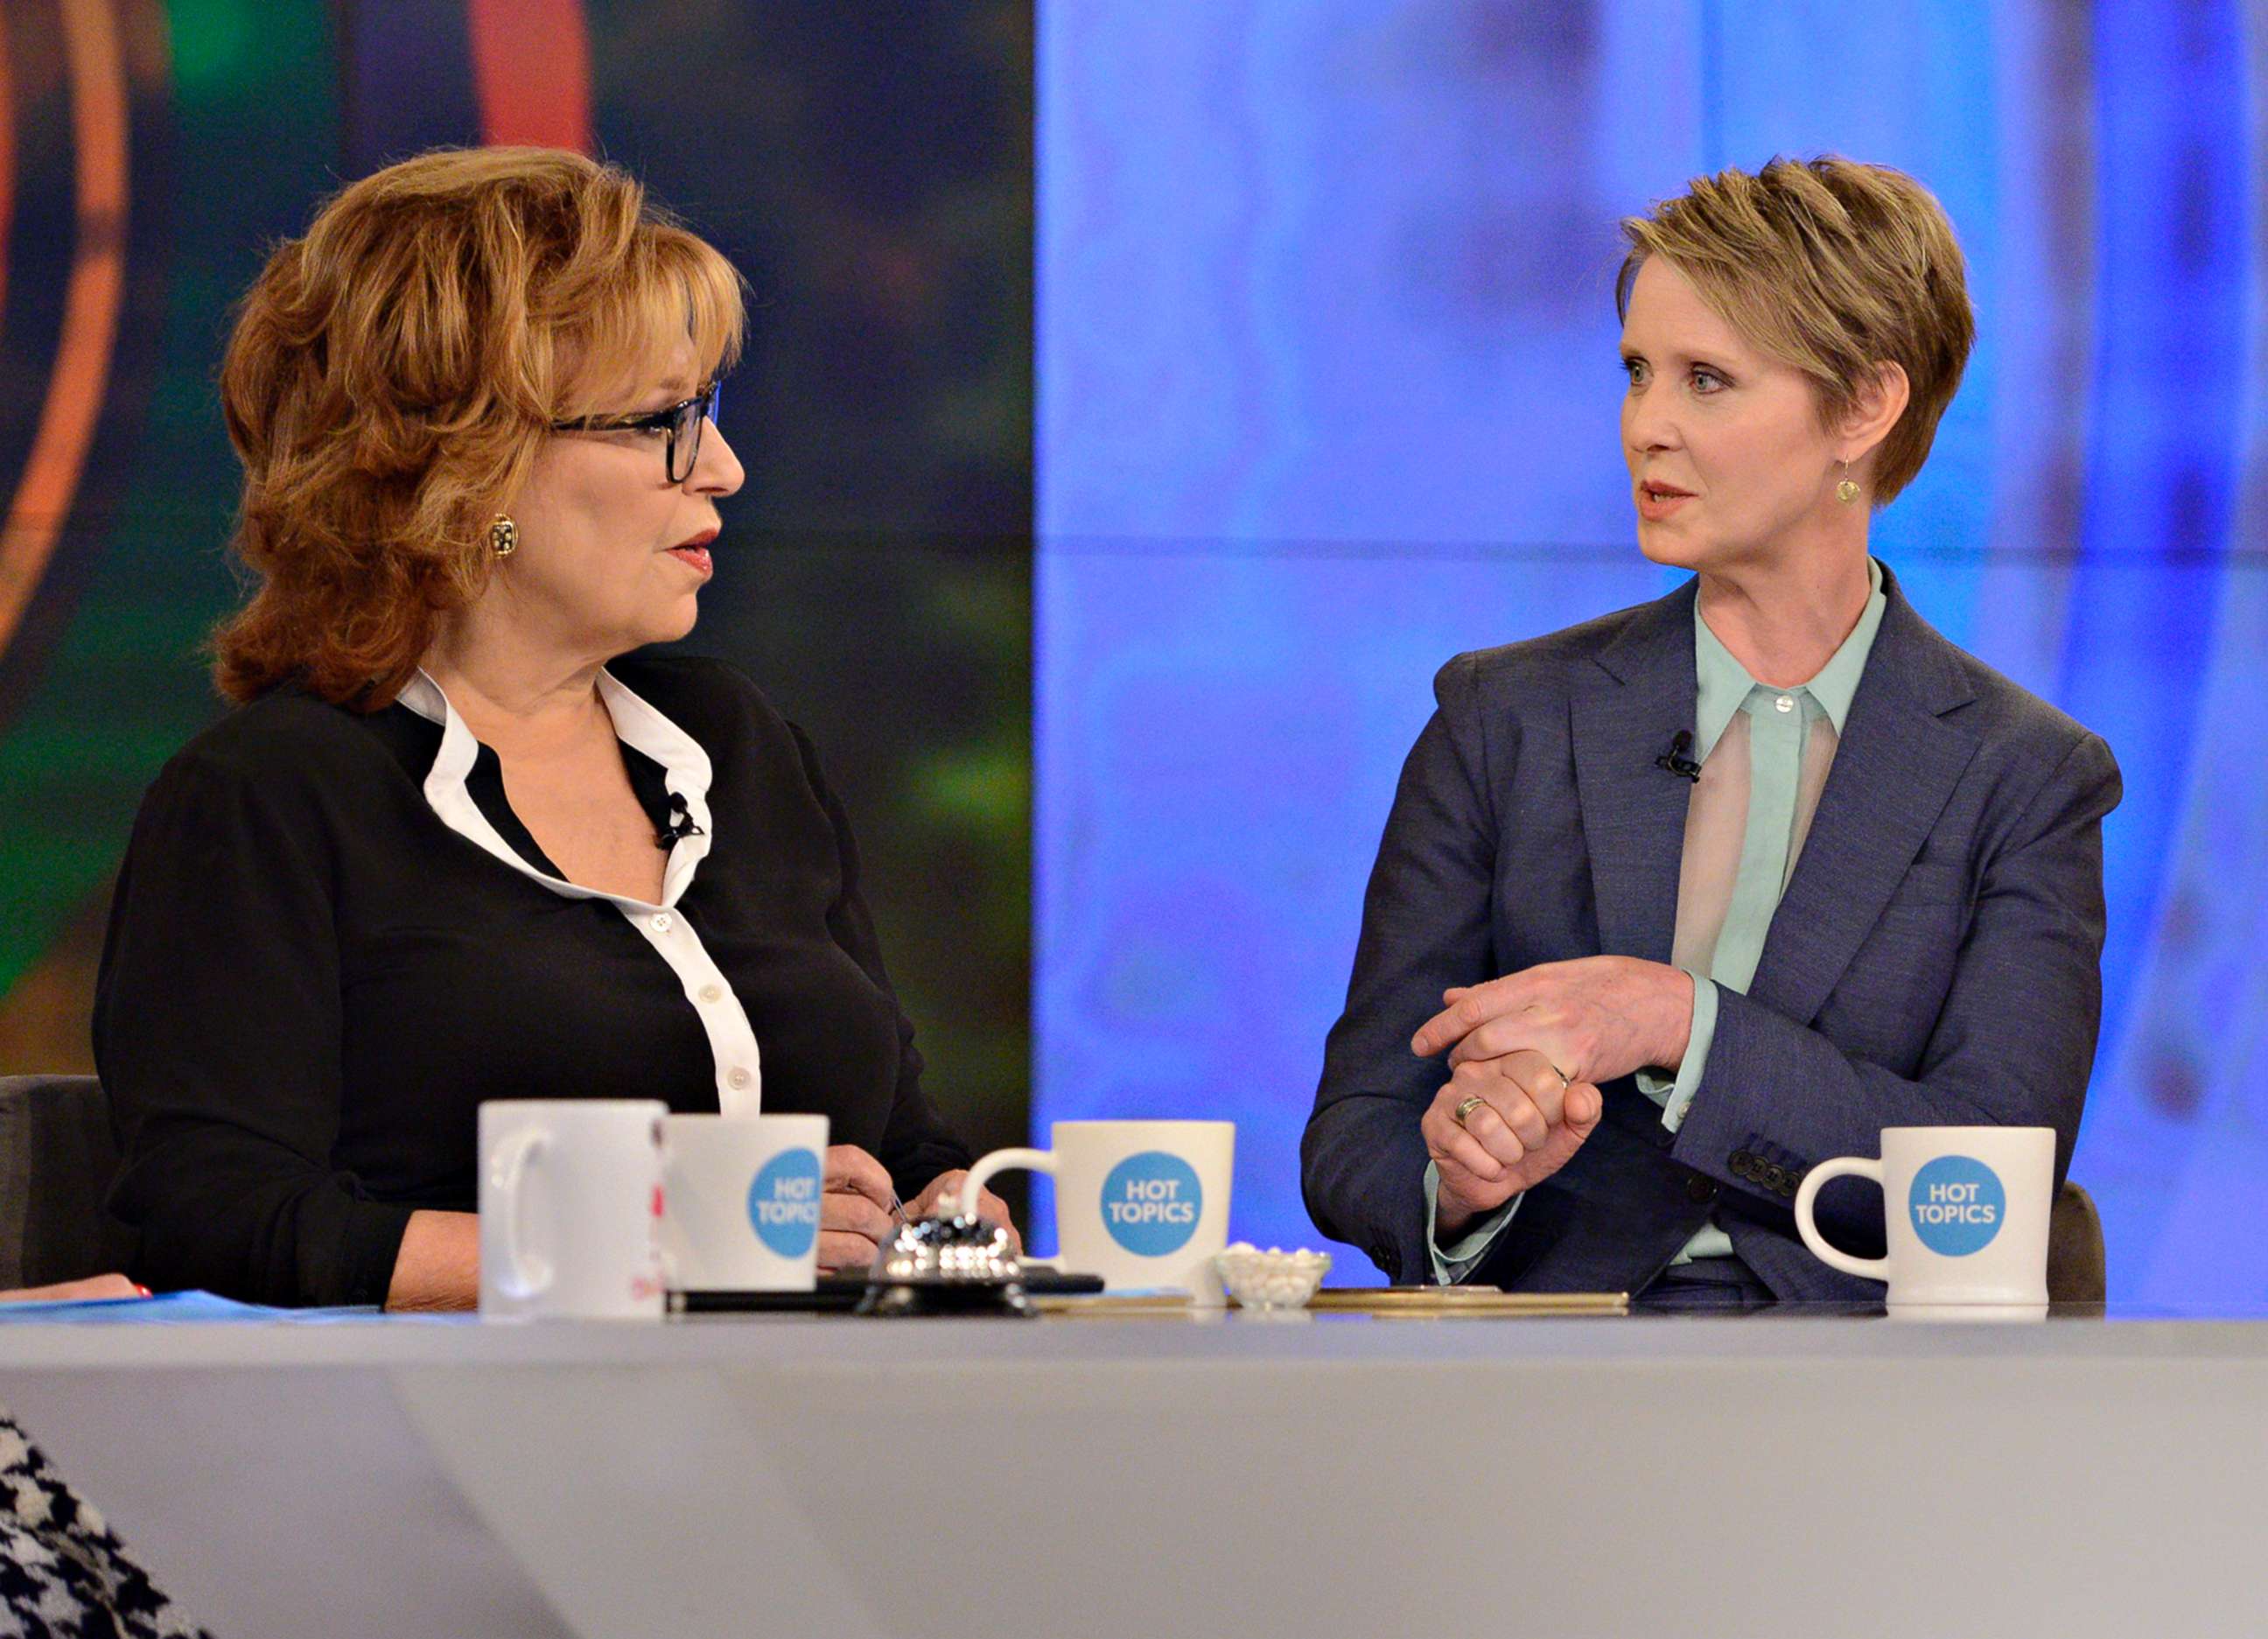 PHOTO: Cynthia Nixon visits "The View" on the ABC television network, June 21, 2018.